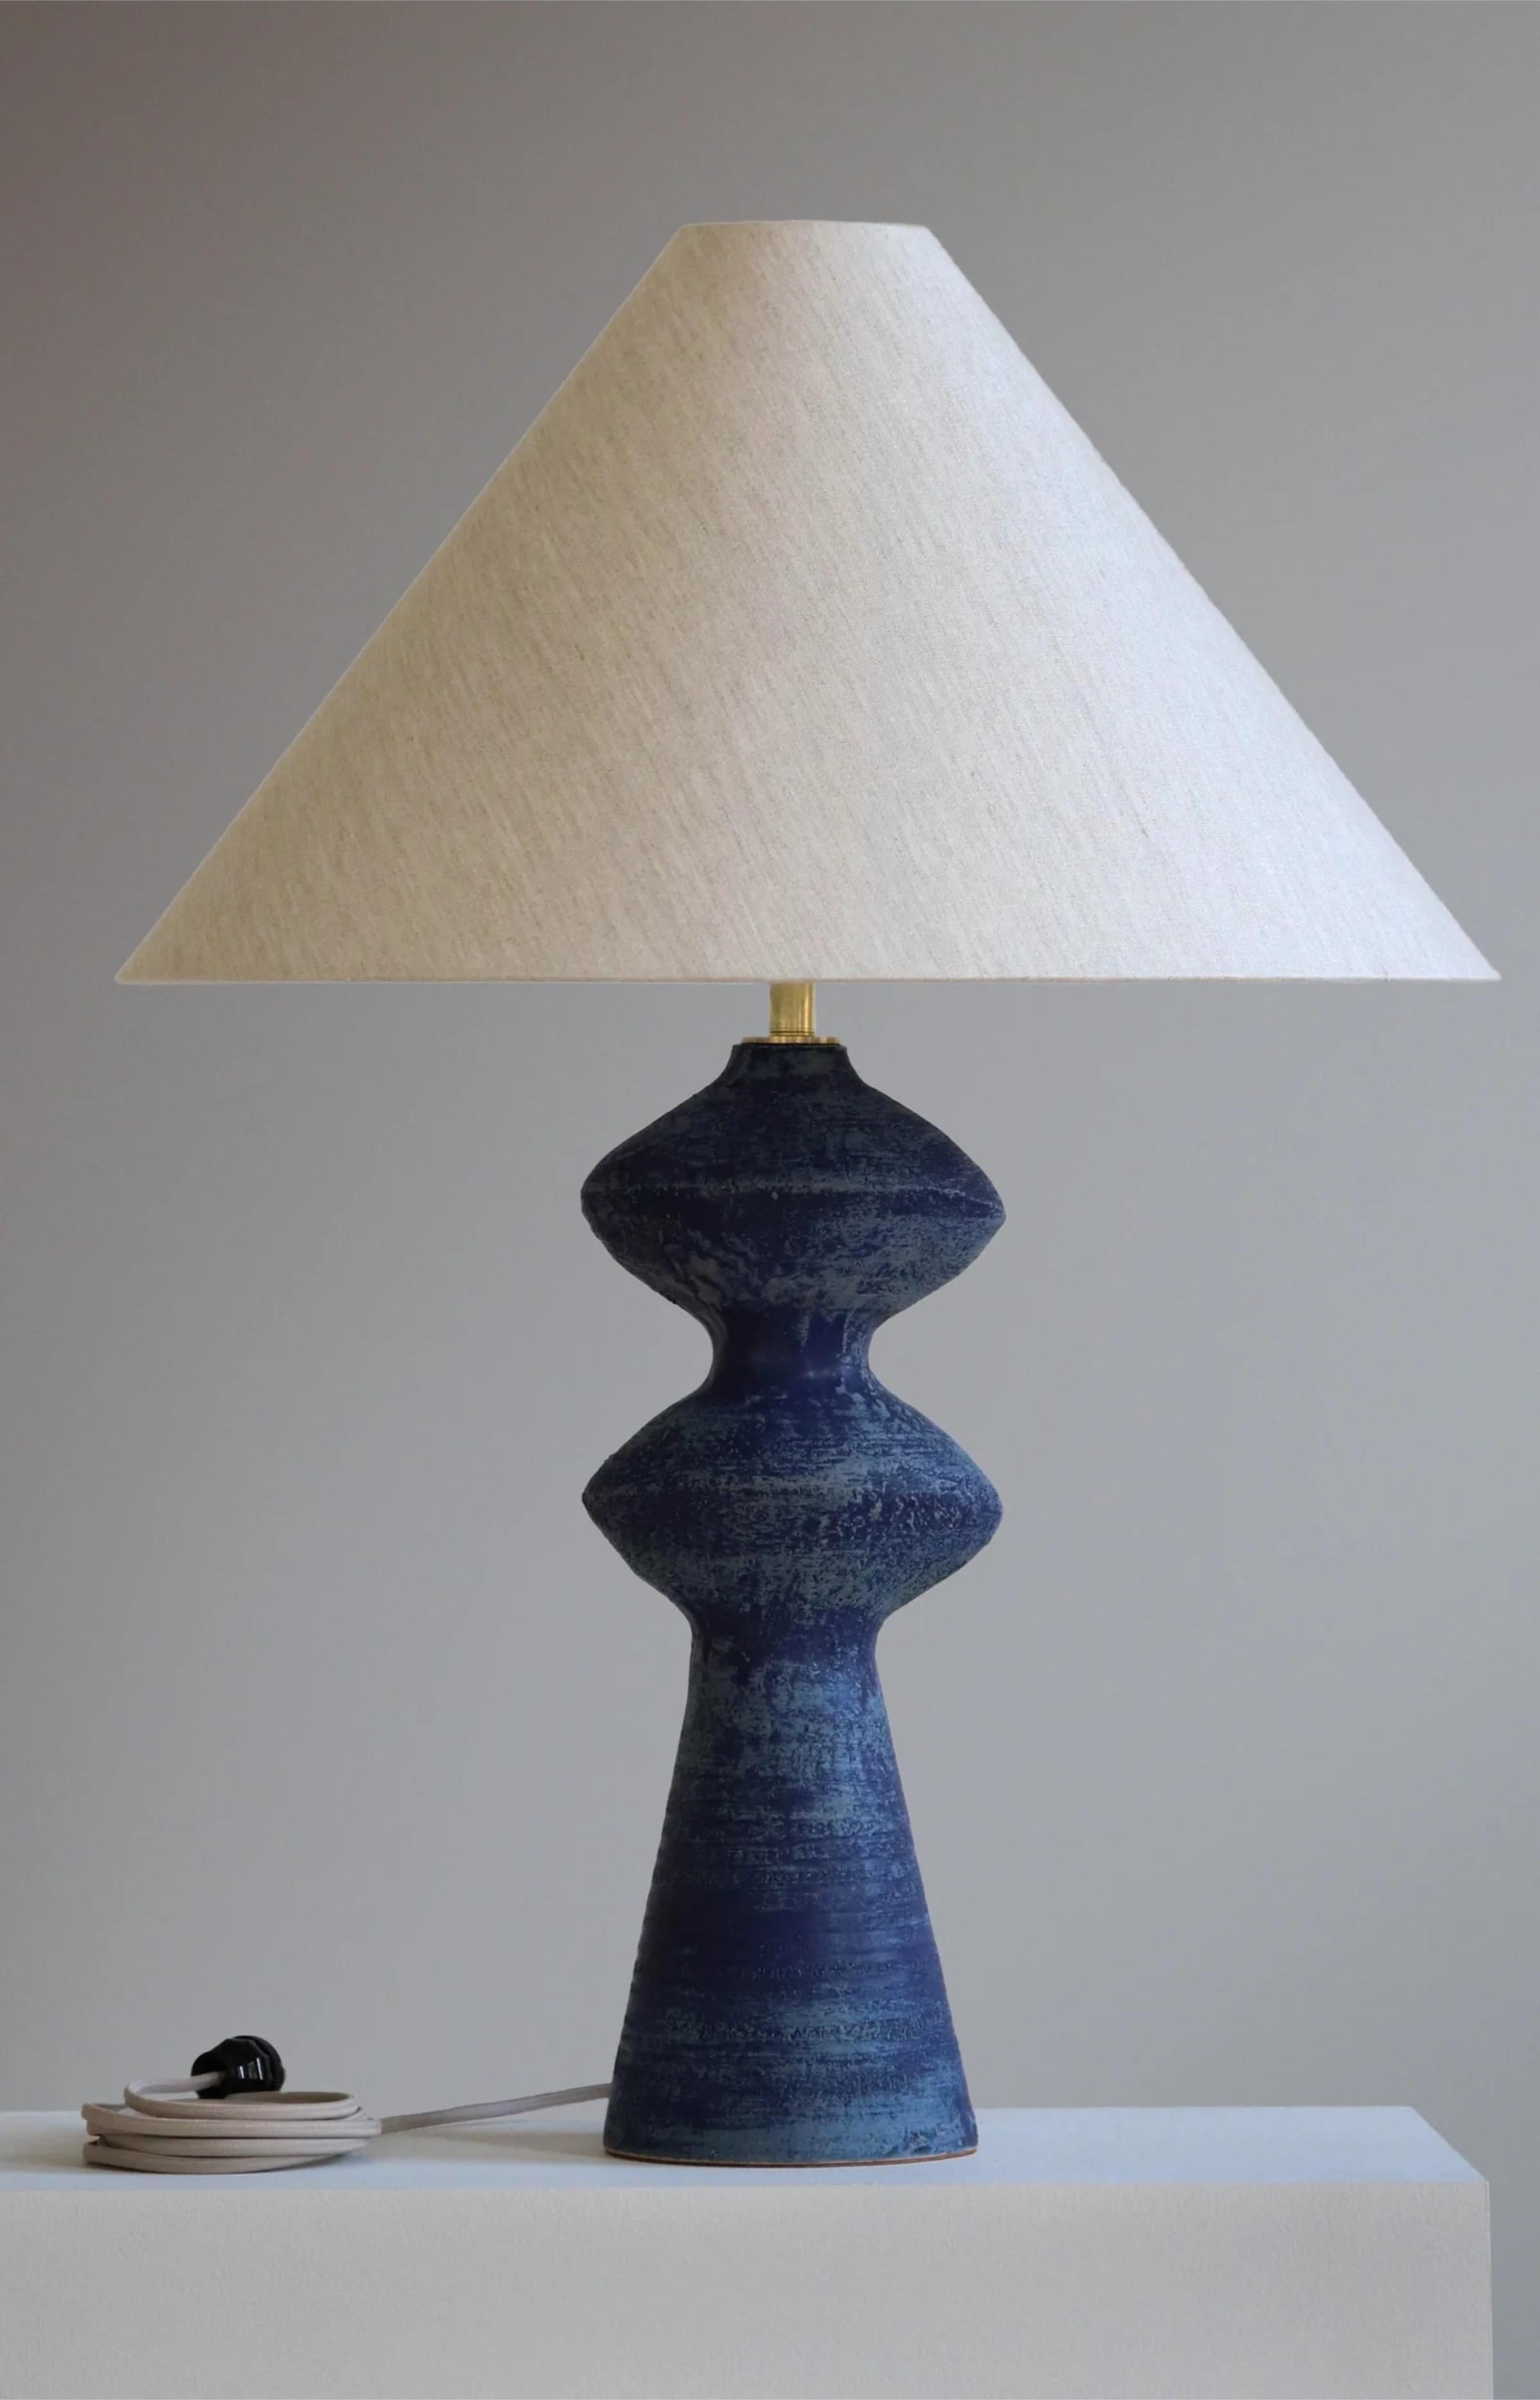 Lapis Pollux 32 Table Lamp by Danny Kaplan Studio
Dimensions: ⌀ 56 x H 82 cm
Materials: Glazed Ceramic, Unfinished Brass, Wax Paper

This item is handmade, and may exhibit variability within the same piece. We do our best to maintain a consistent